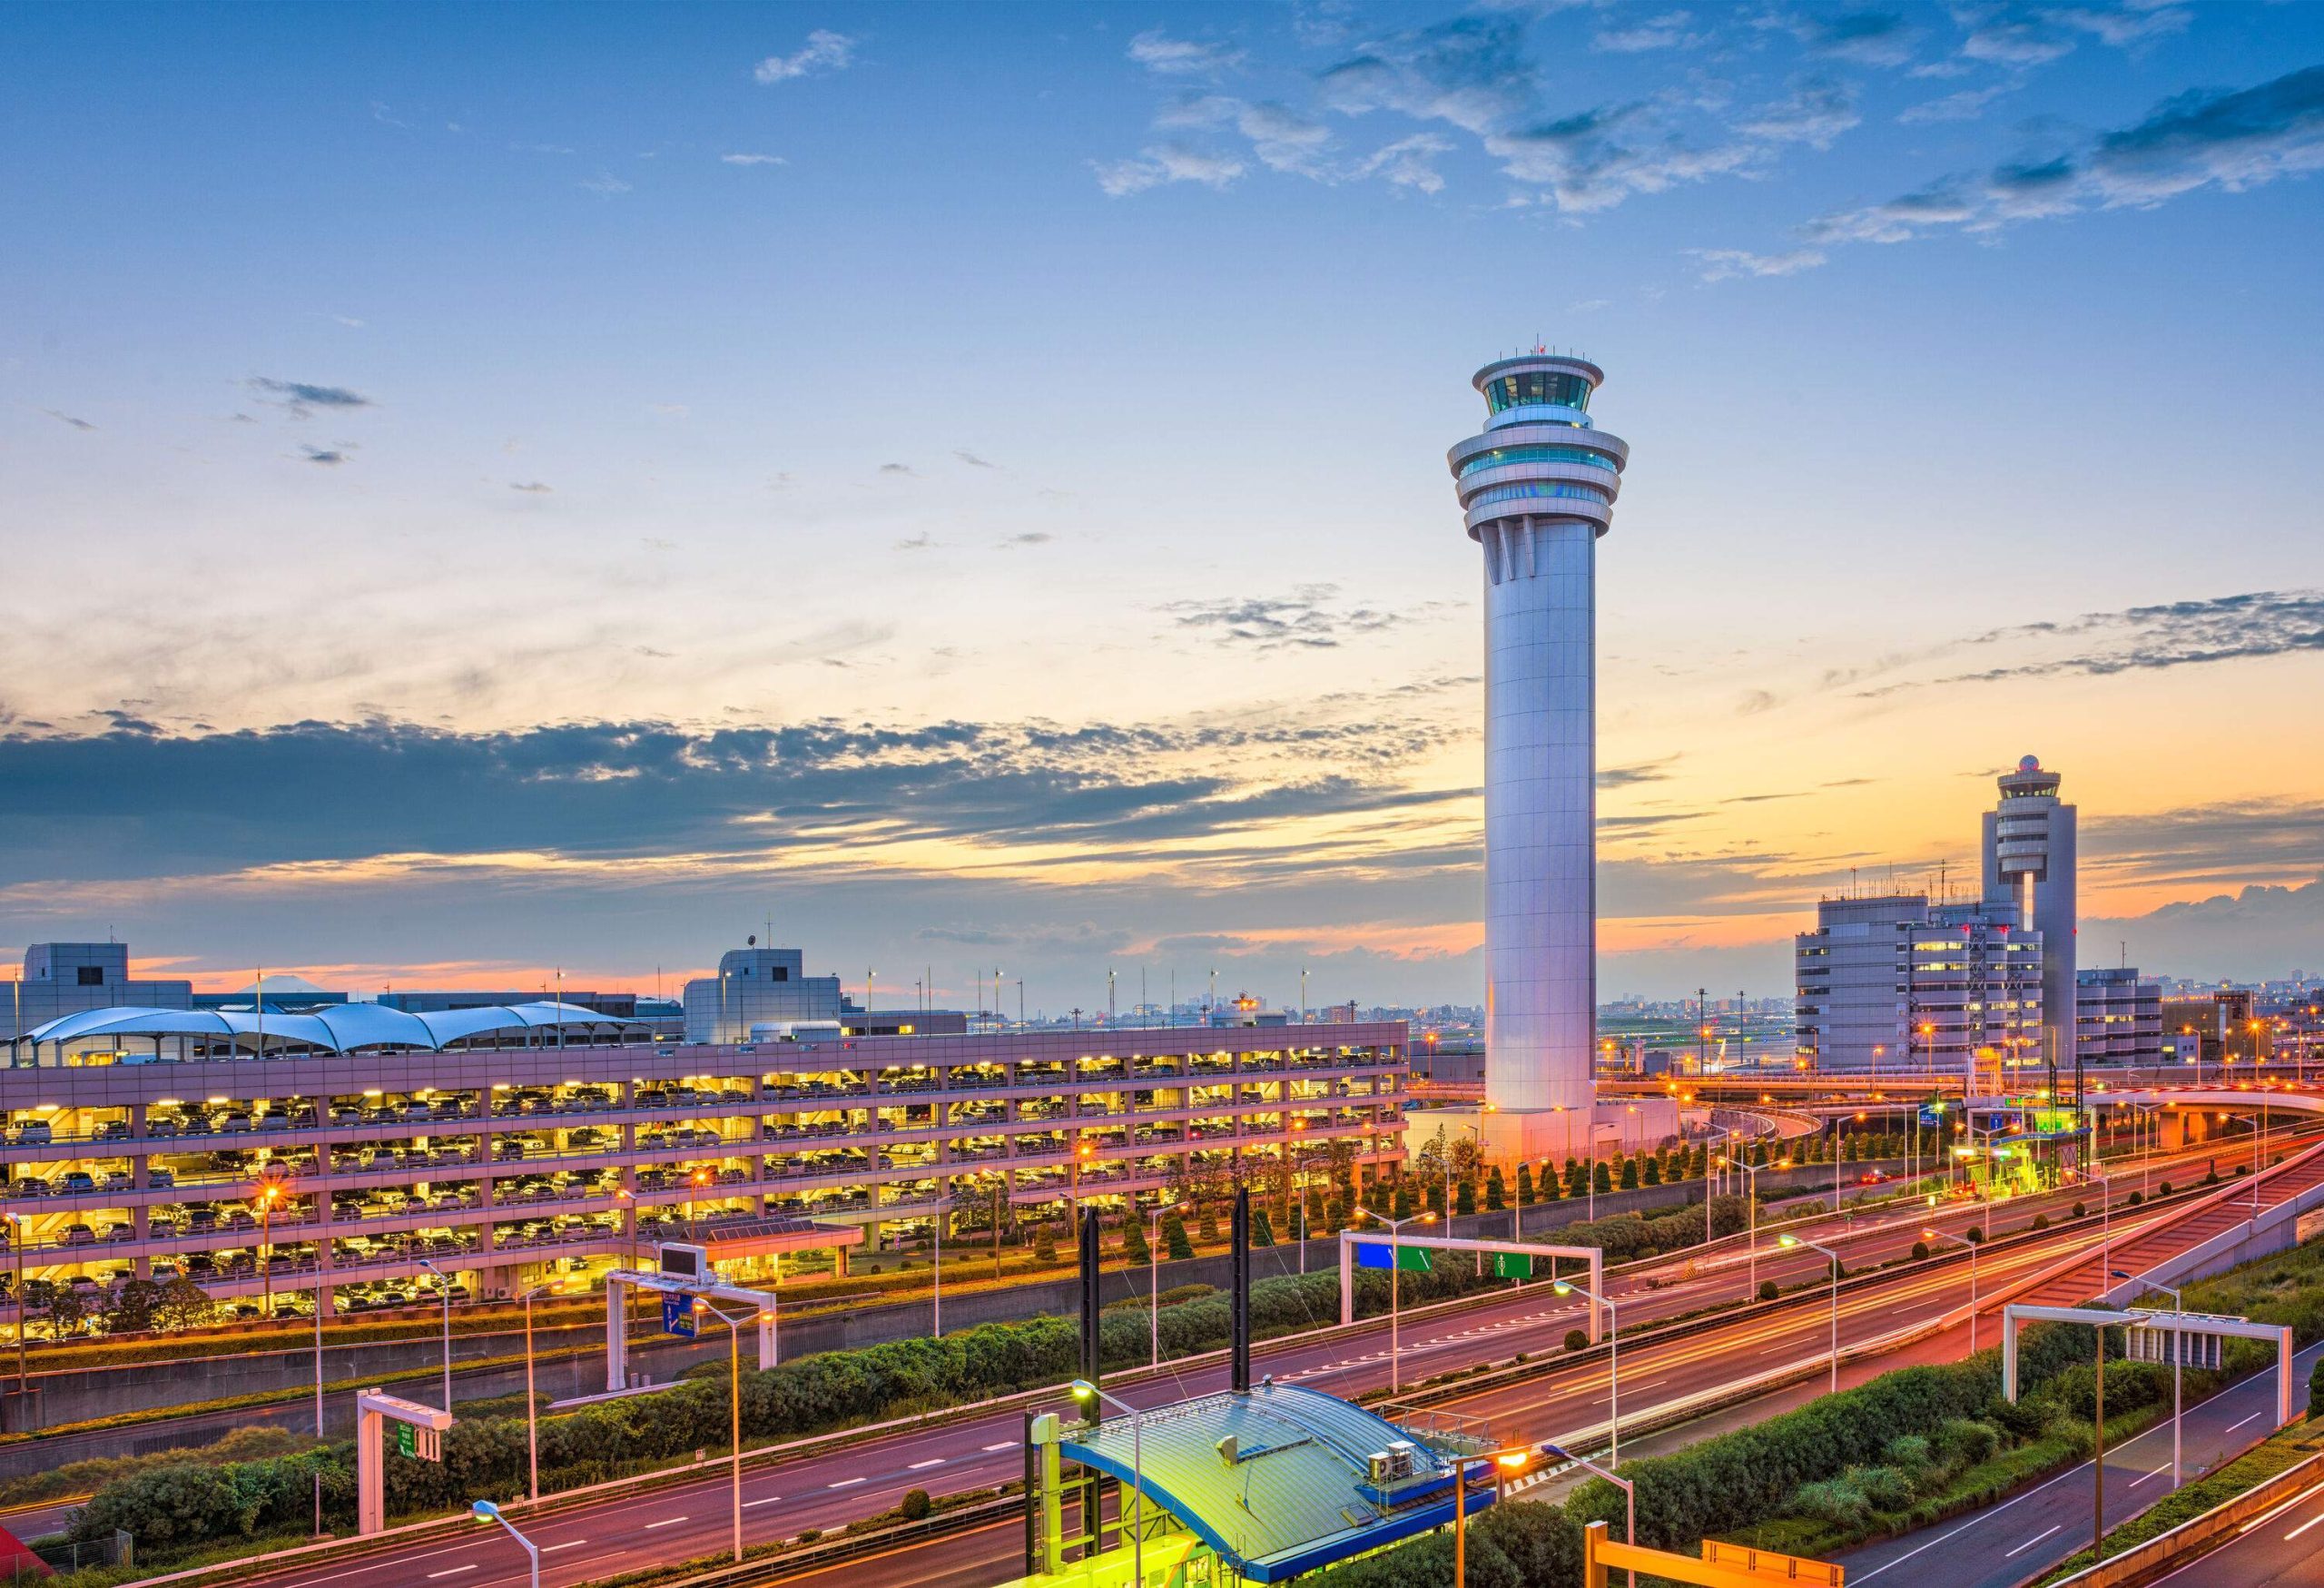 A tall white airport control tower protrudes toward the scenic sky dominating the buildings in the foreground.